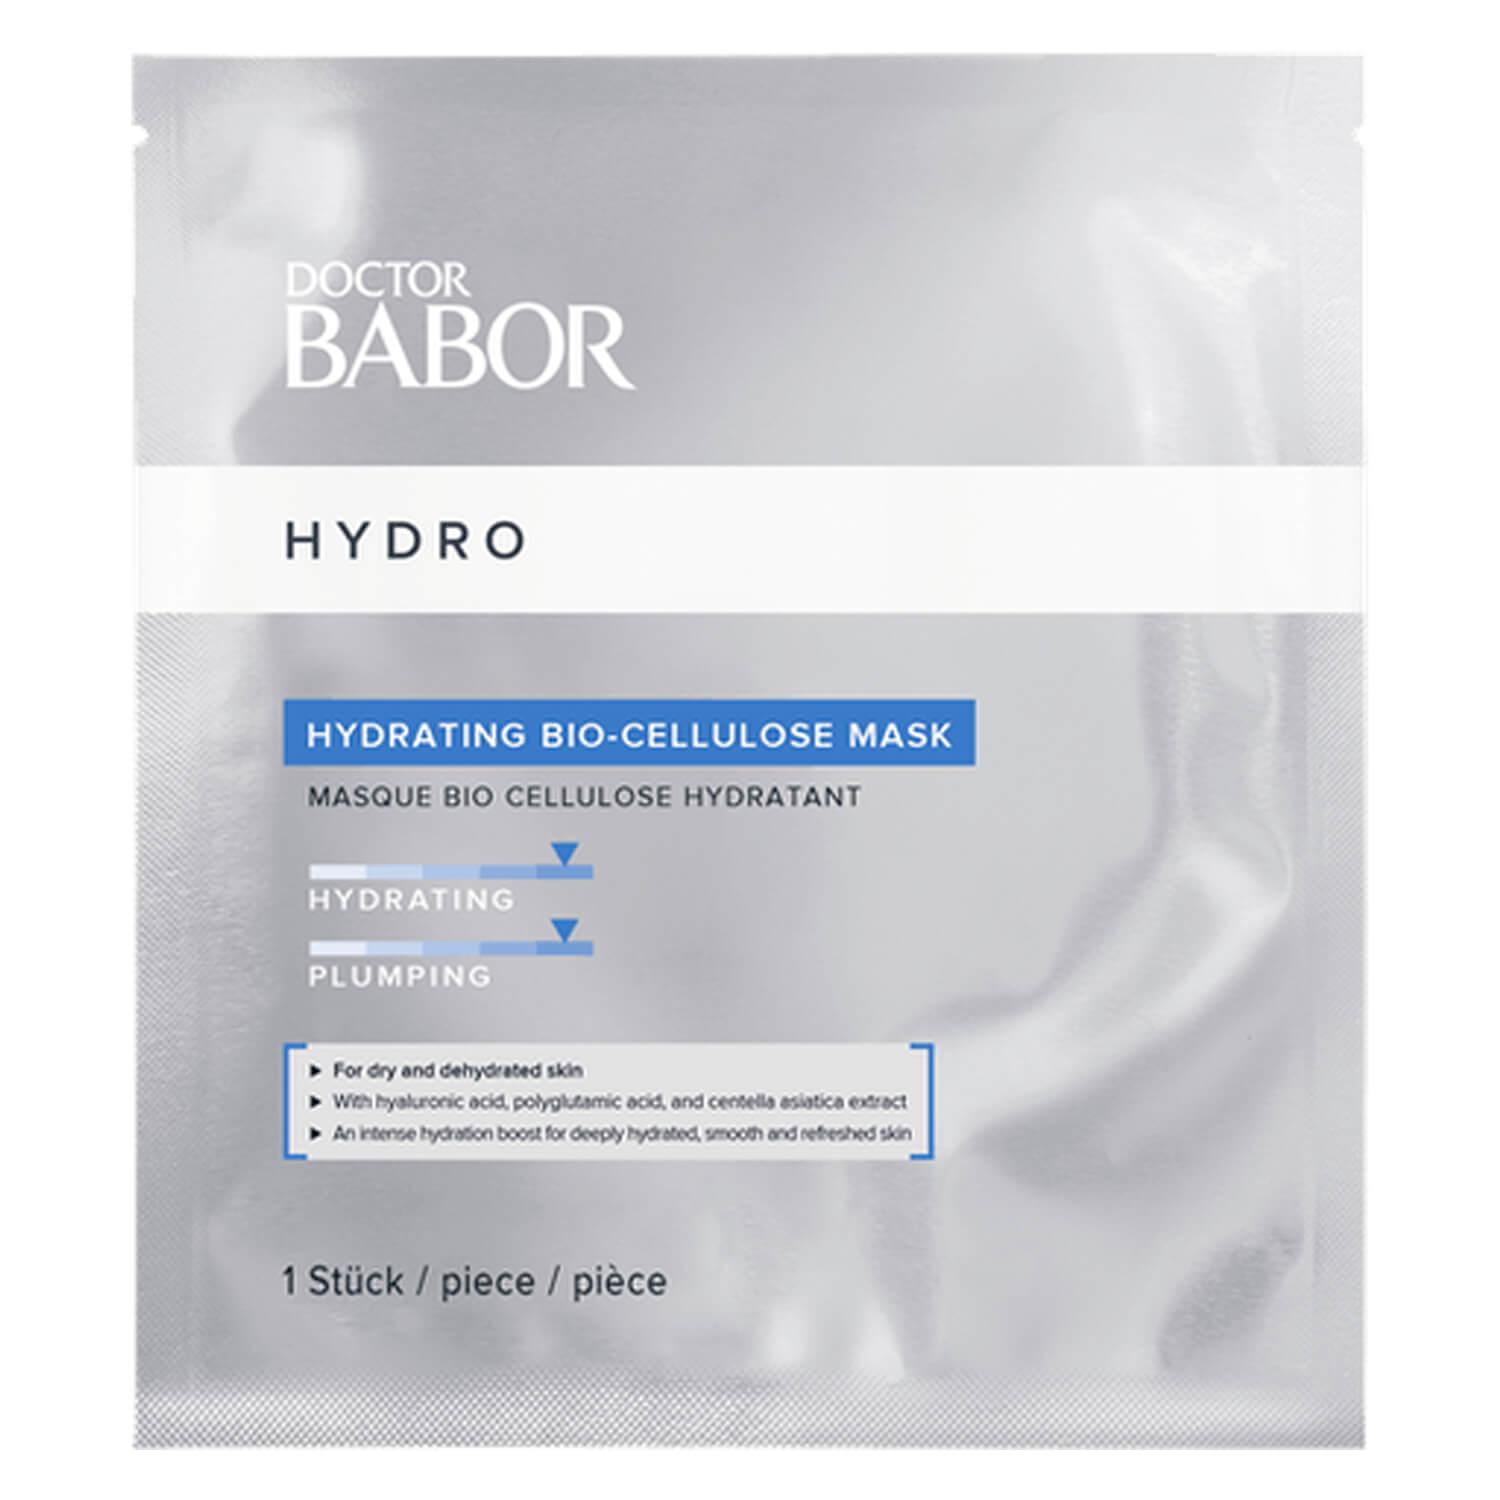 DOCTOR BABOR - Hydrating Bio-Cellulose Mask